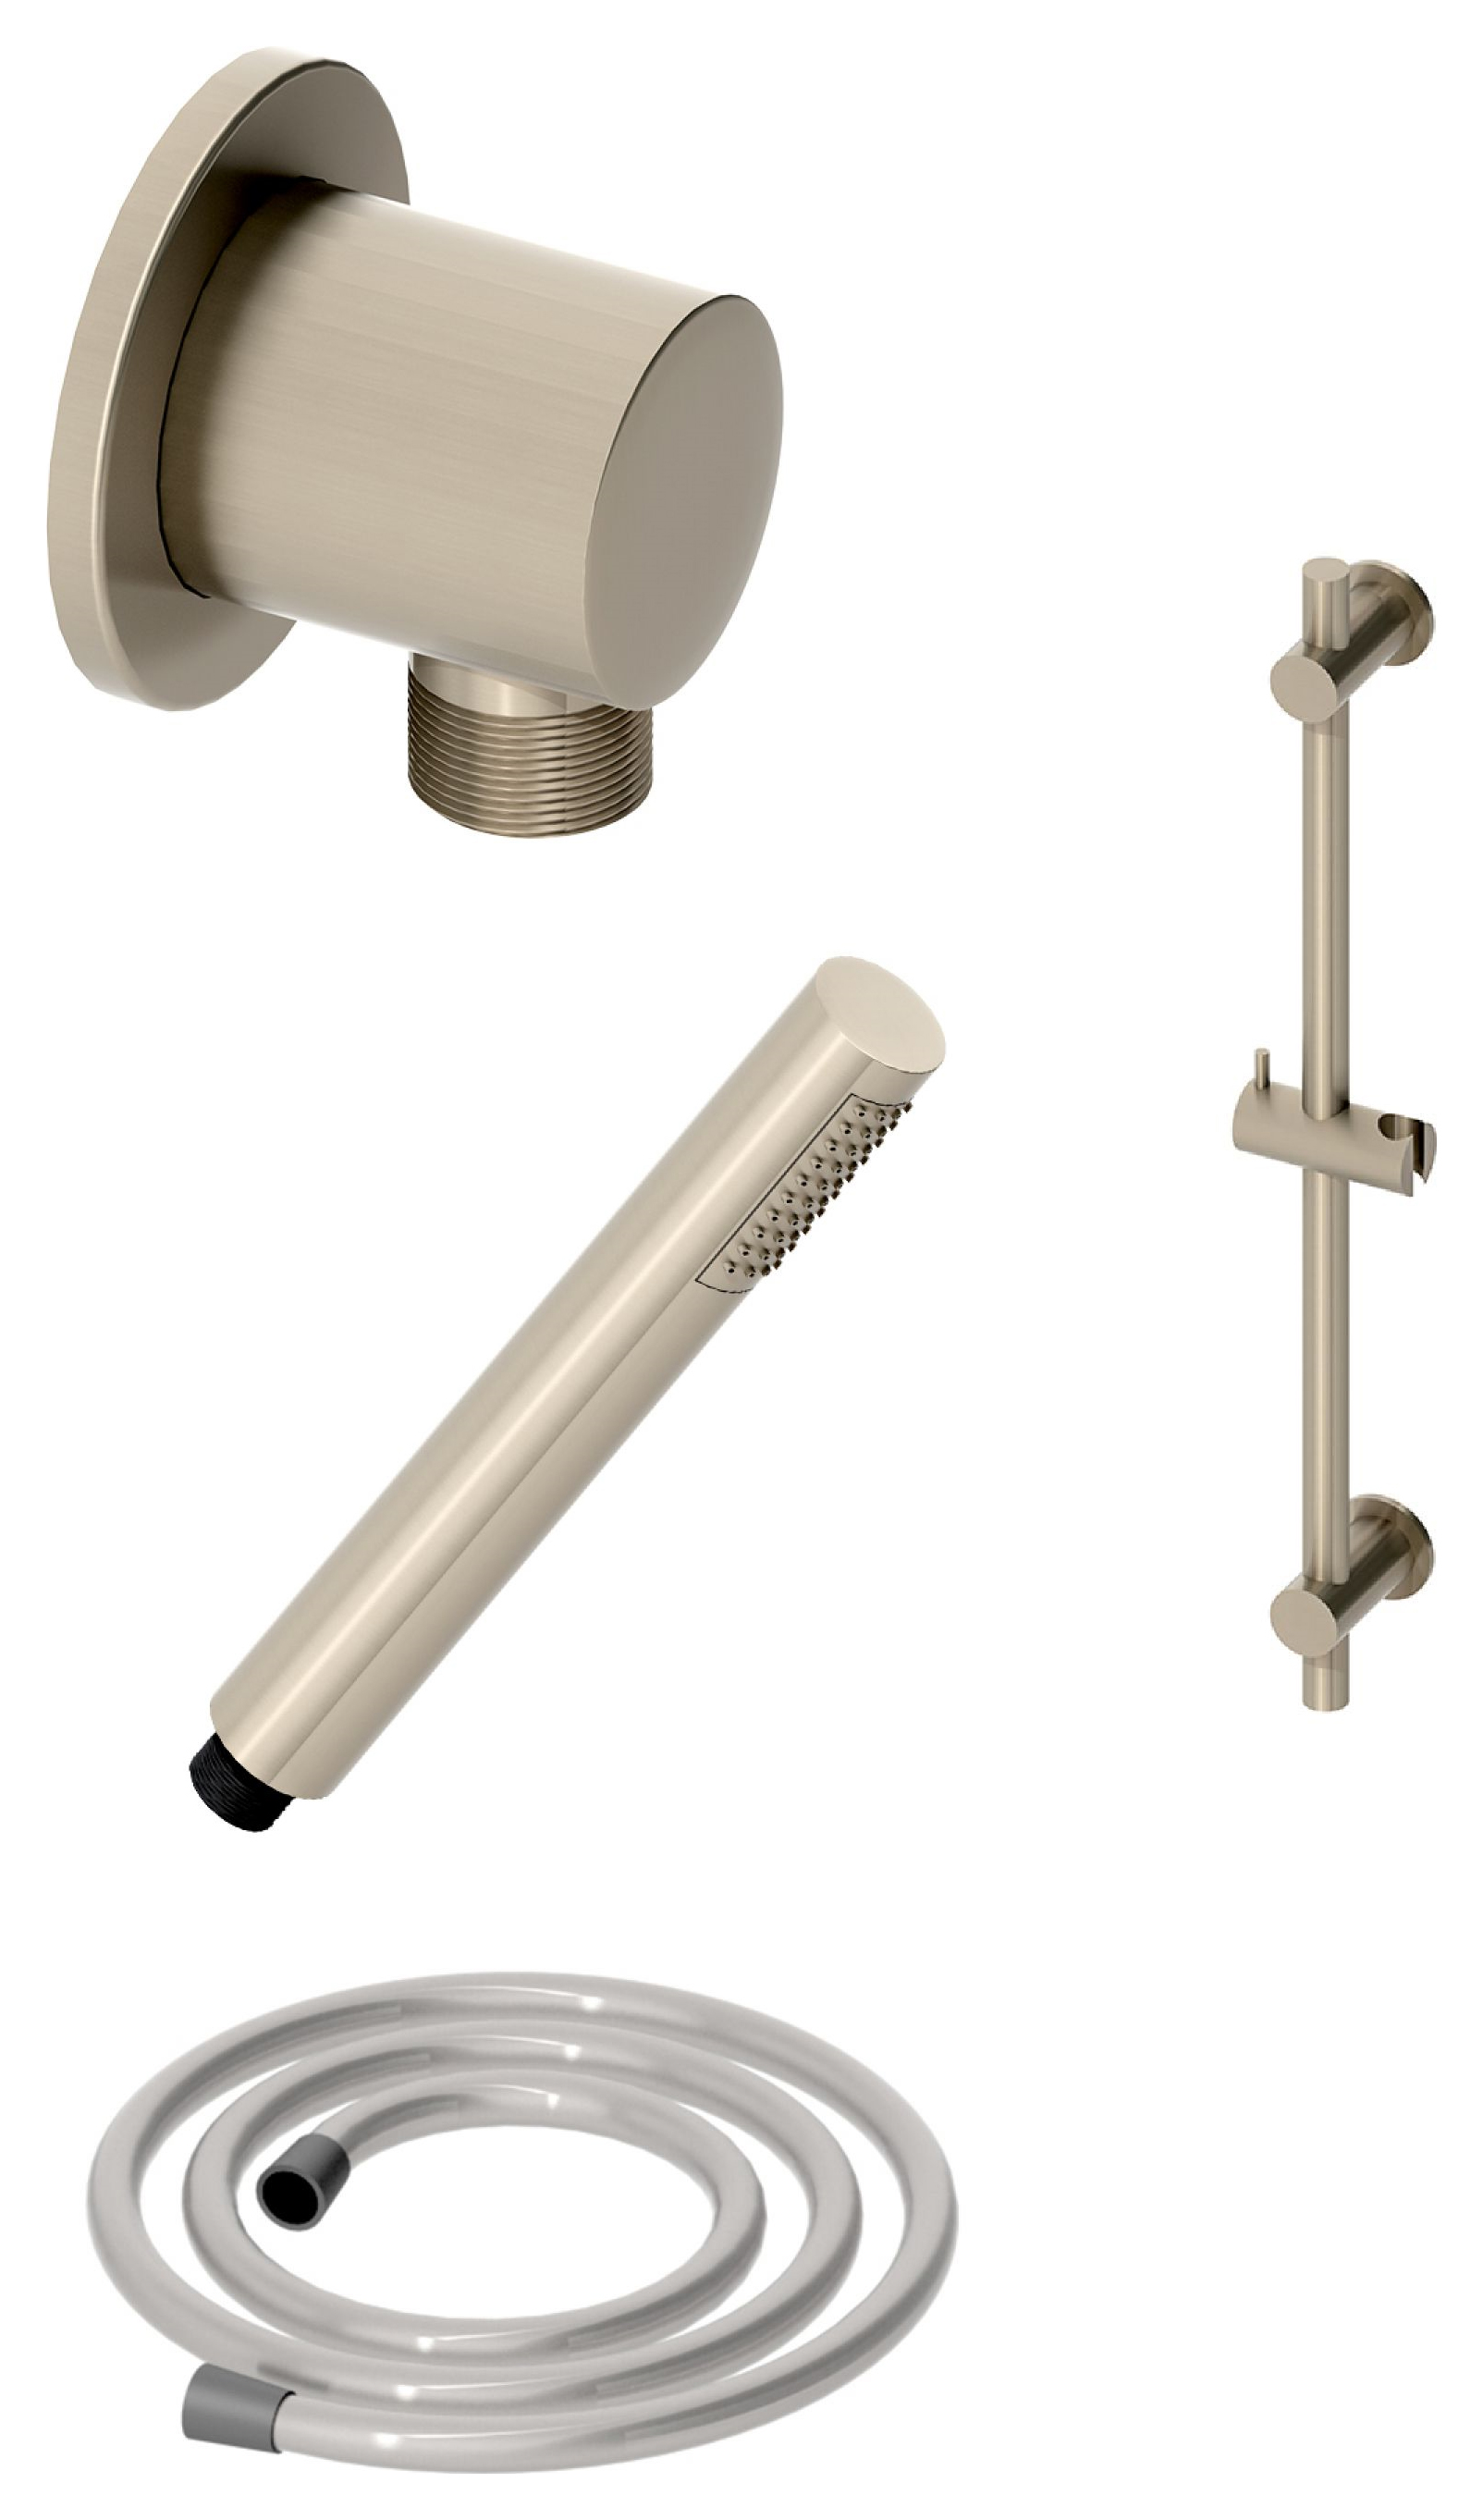 Image of Hadleigh Shower Riser Rail, Wall Outlet, 1.6m Hose & Handset Accessories Kit in Brushed Nickel